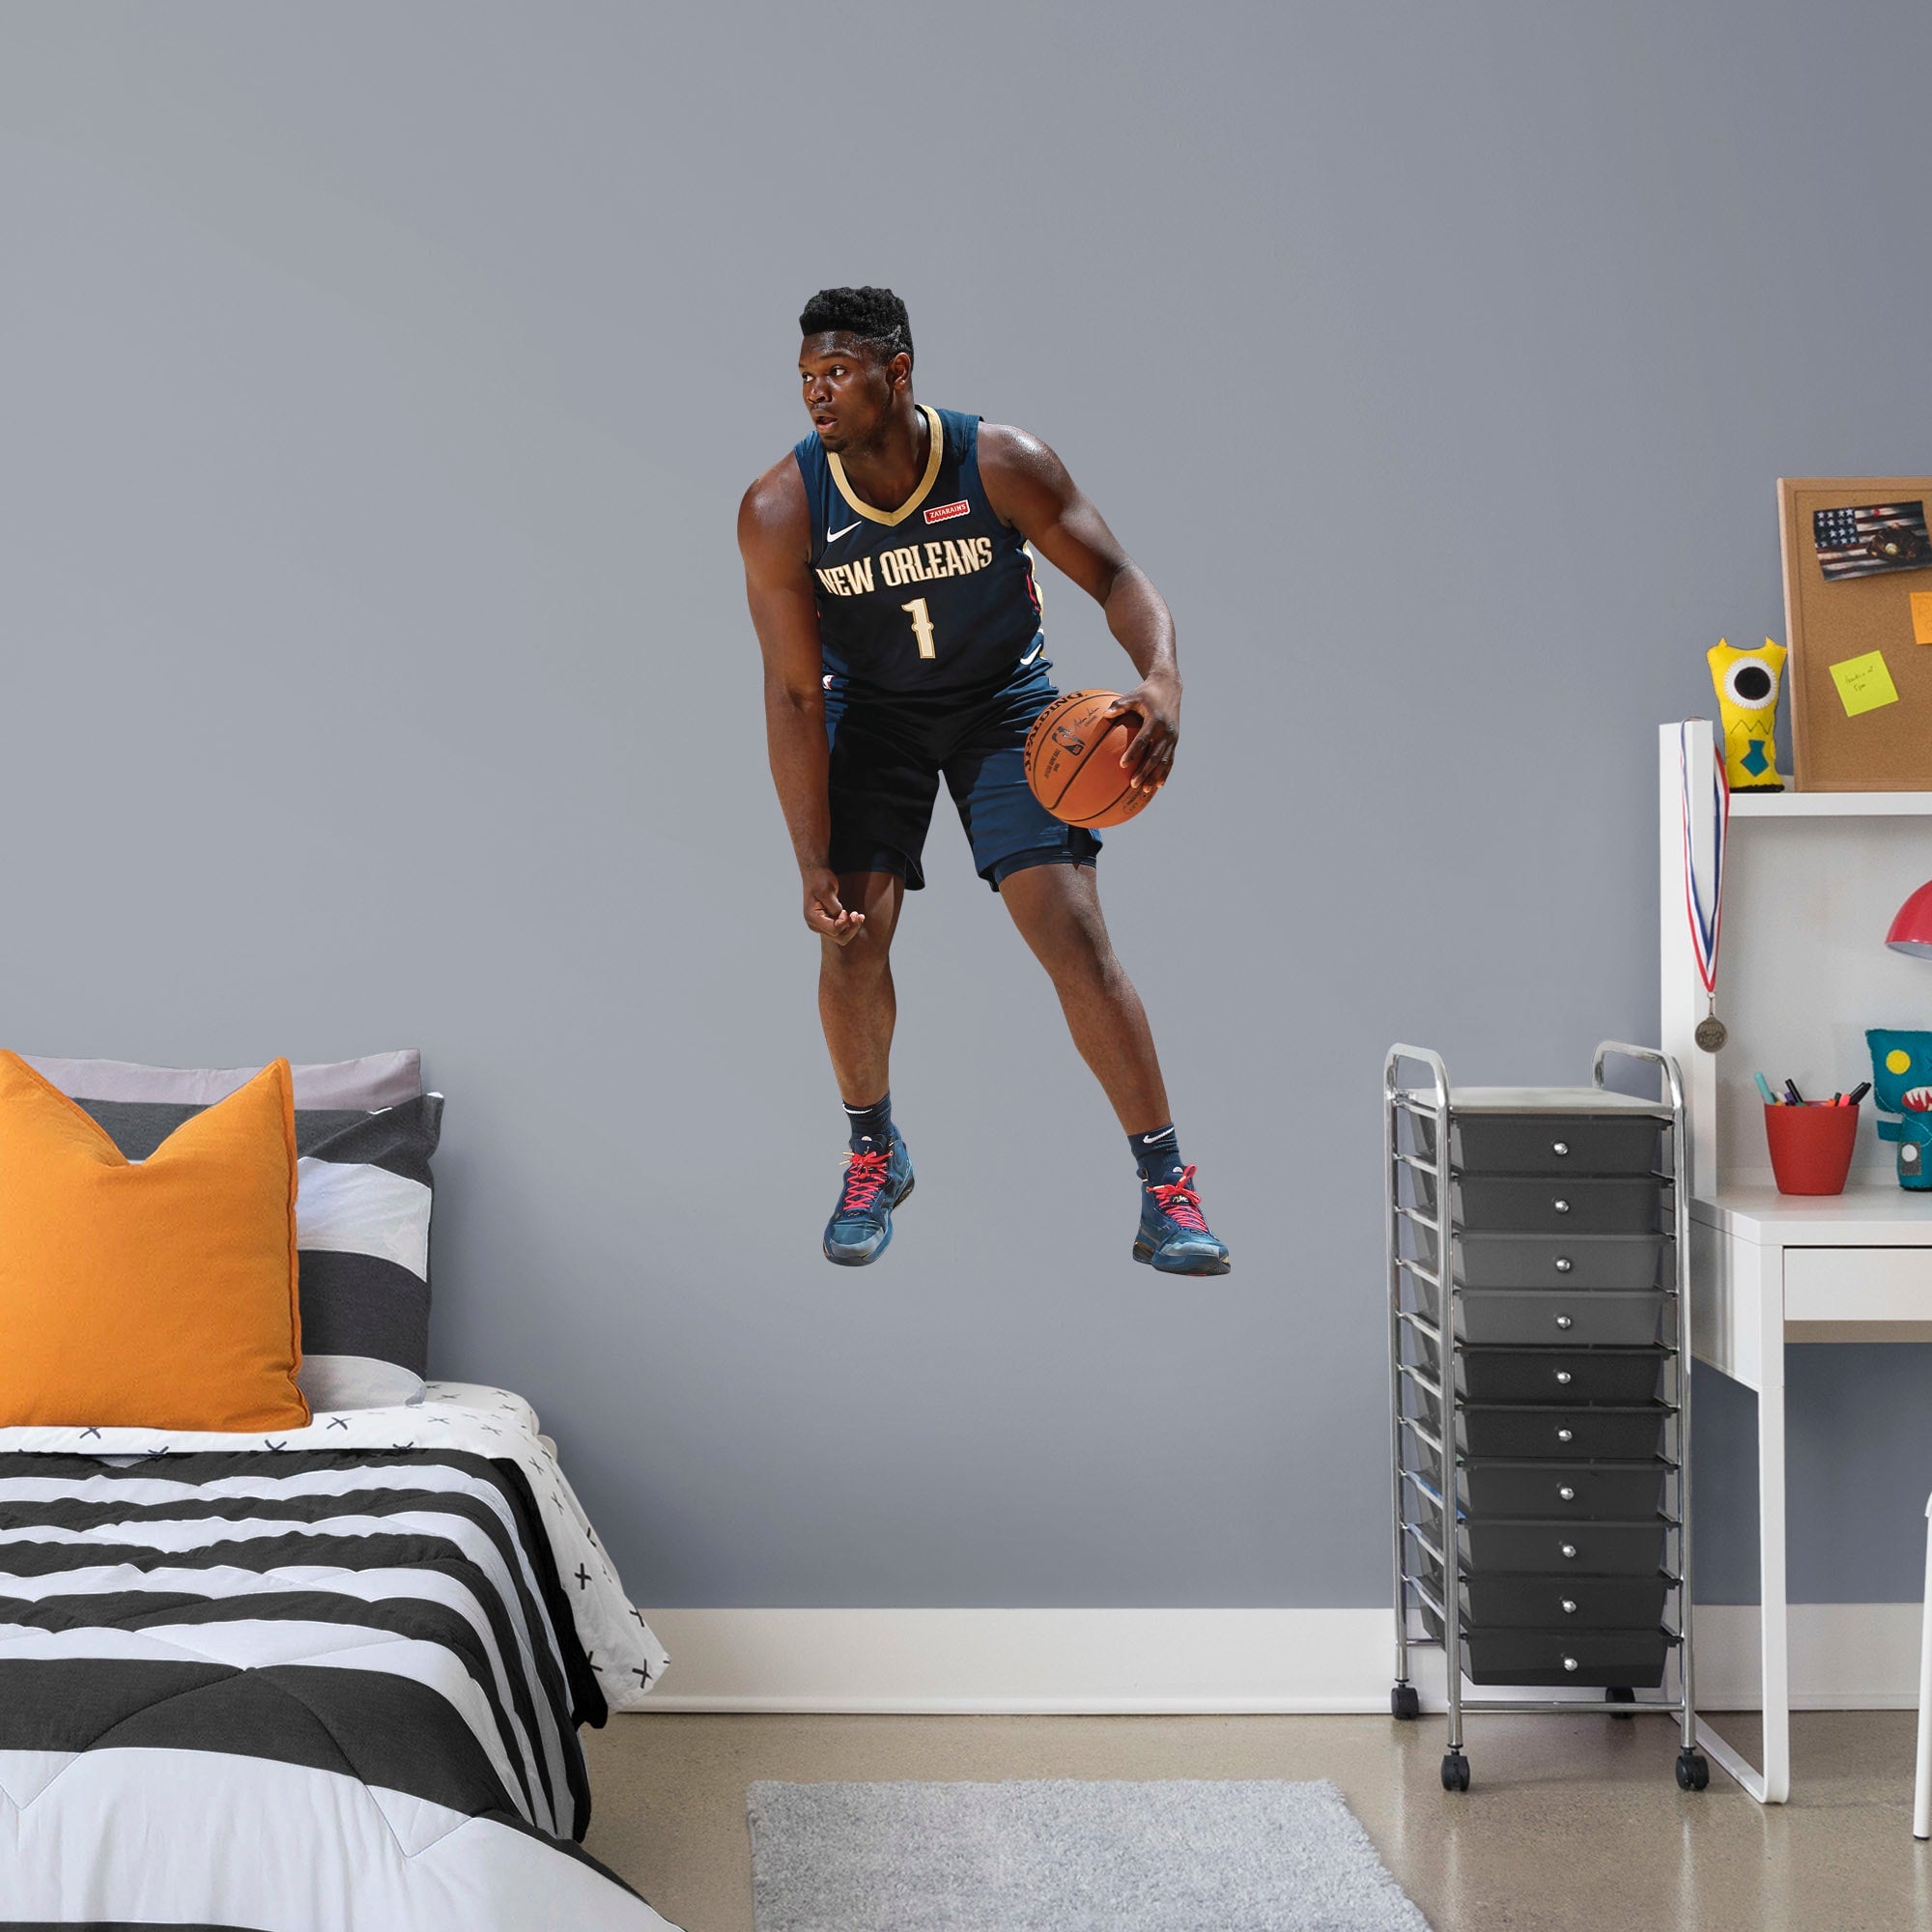 Zion Williamson for New Orleans Pelicans: Icon Jersey - Officially Licensed NBA Removable Wall Decal Giant Athlete + 2 Decals (2